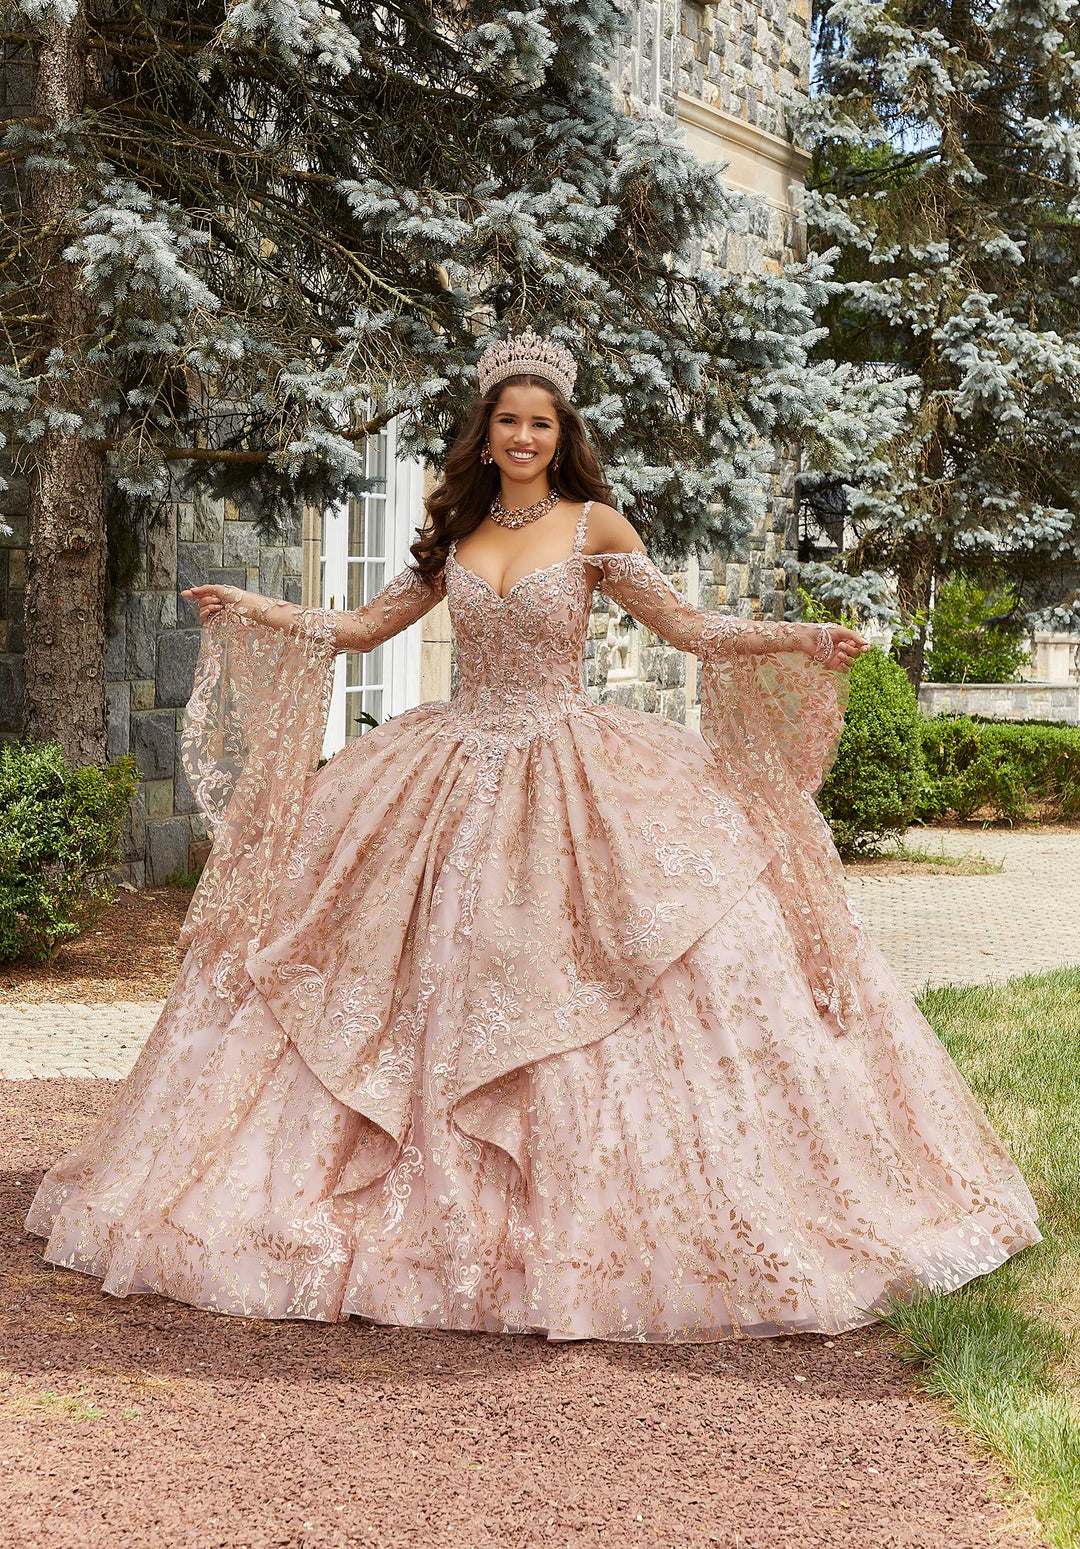 Morilee #89416 Blush/Rose Gold Rhinestone and Crystal Beaded Patterned Glitter Quineañera Dress